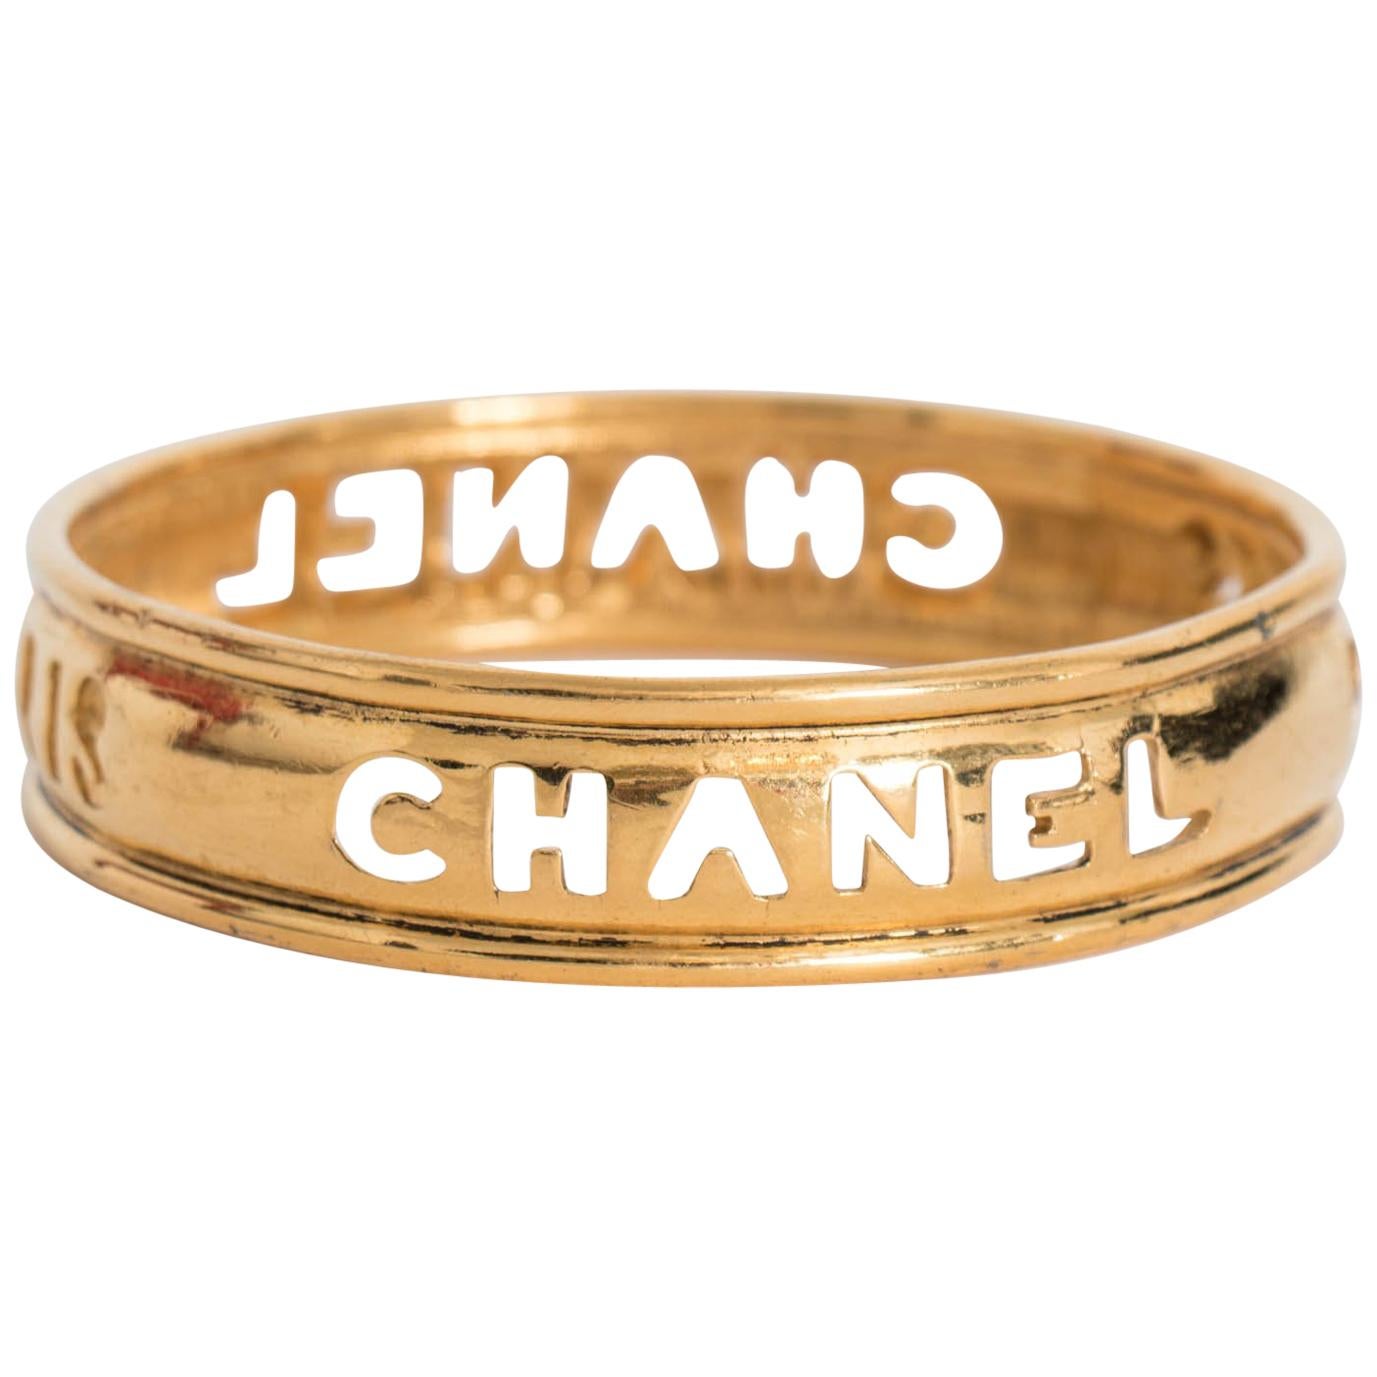 A 1990s Slim Chanel Gold Plated Bangle For Sale